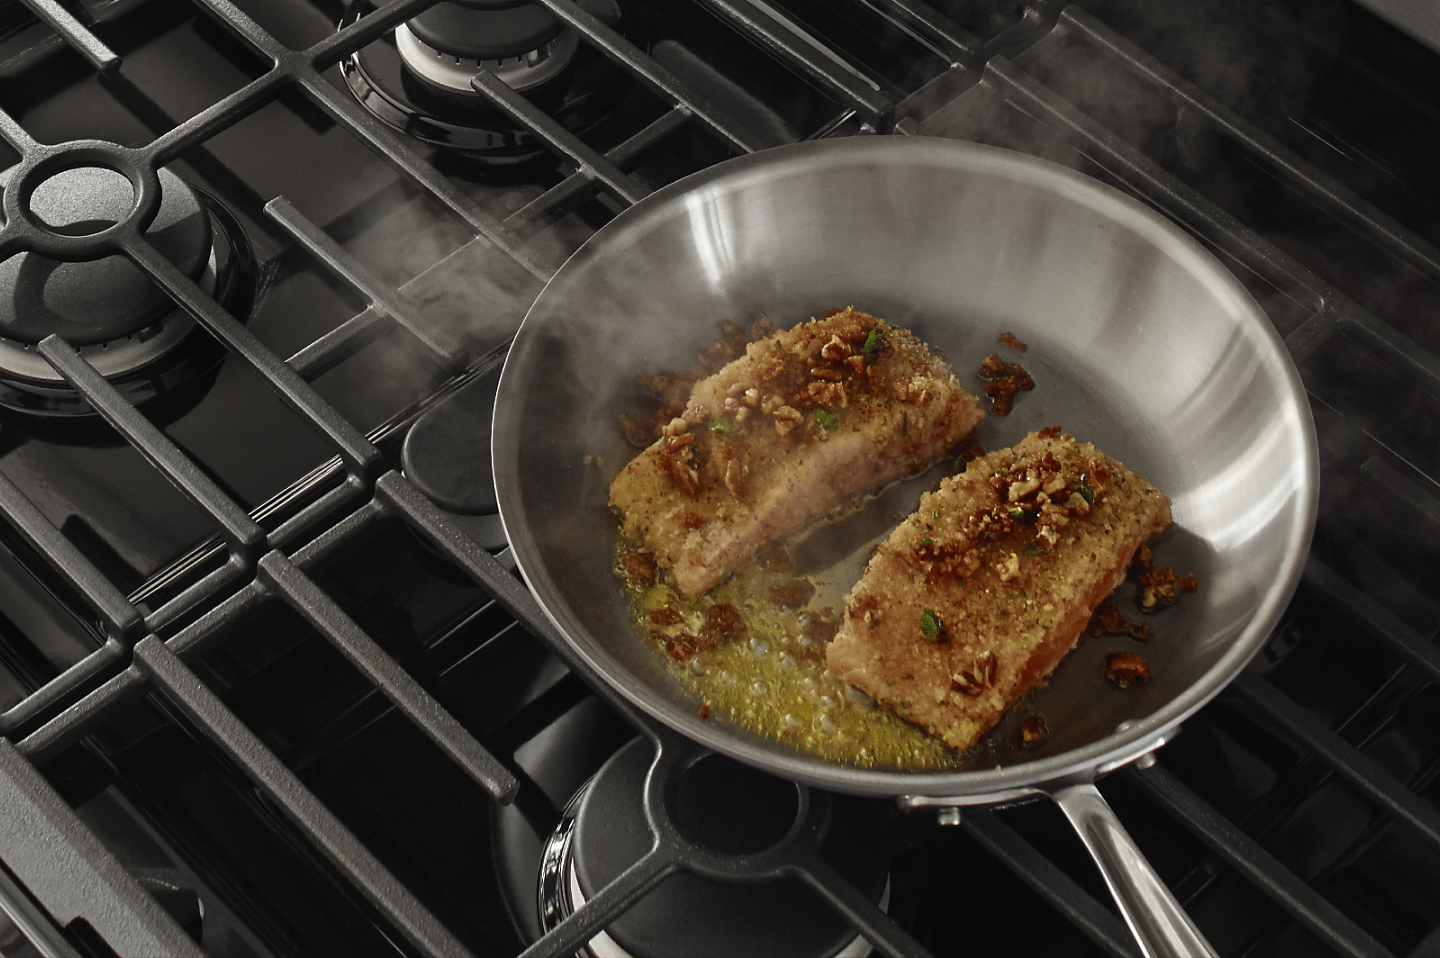 Fish filets simmering in a stainless steel pan with oil